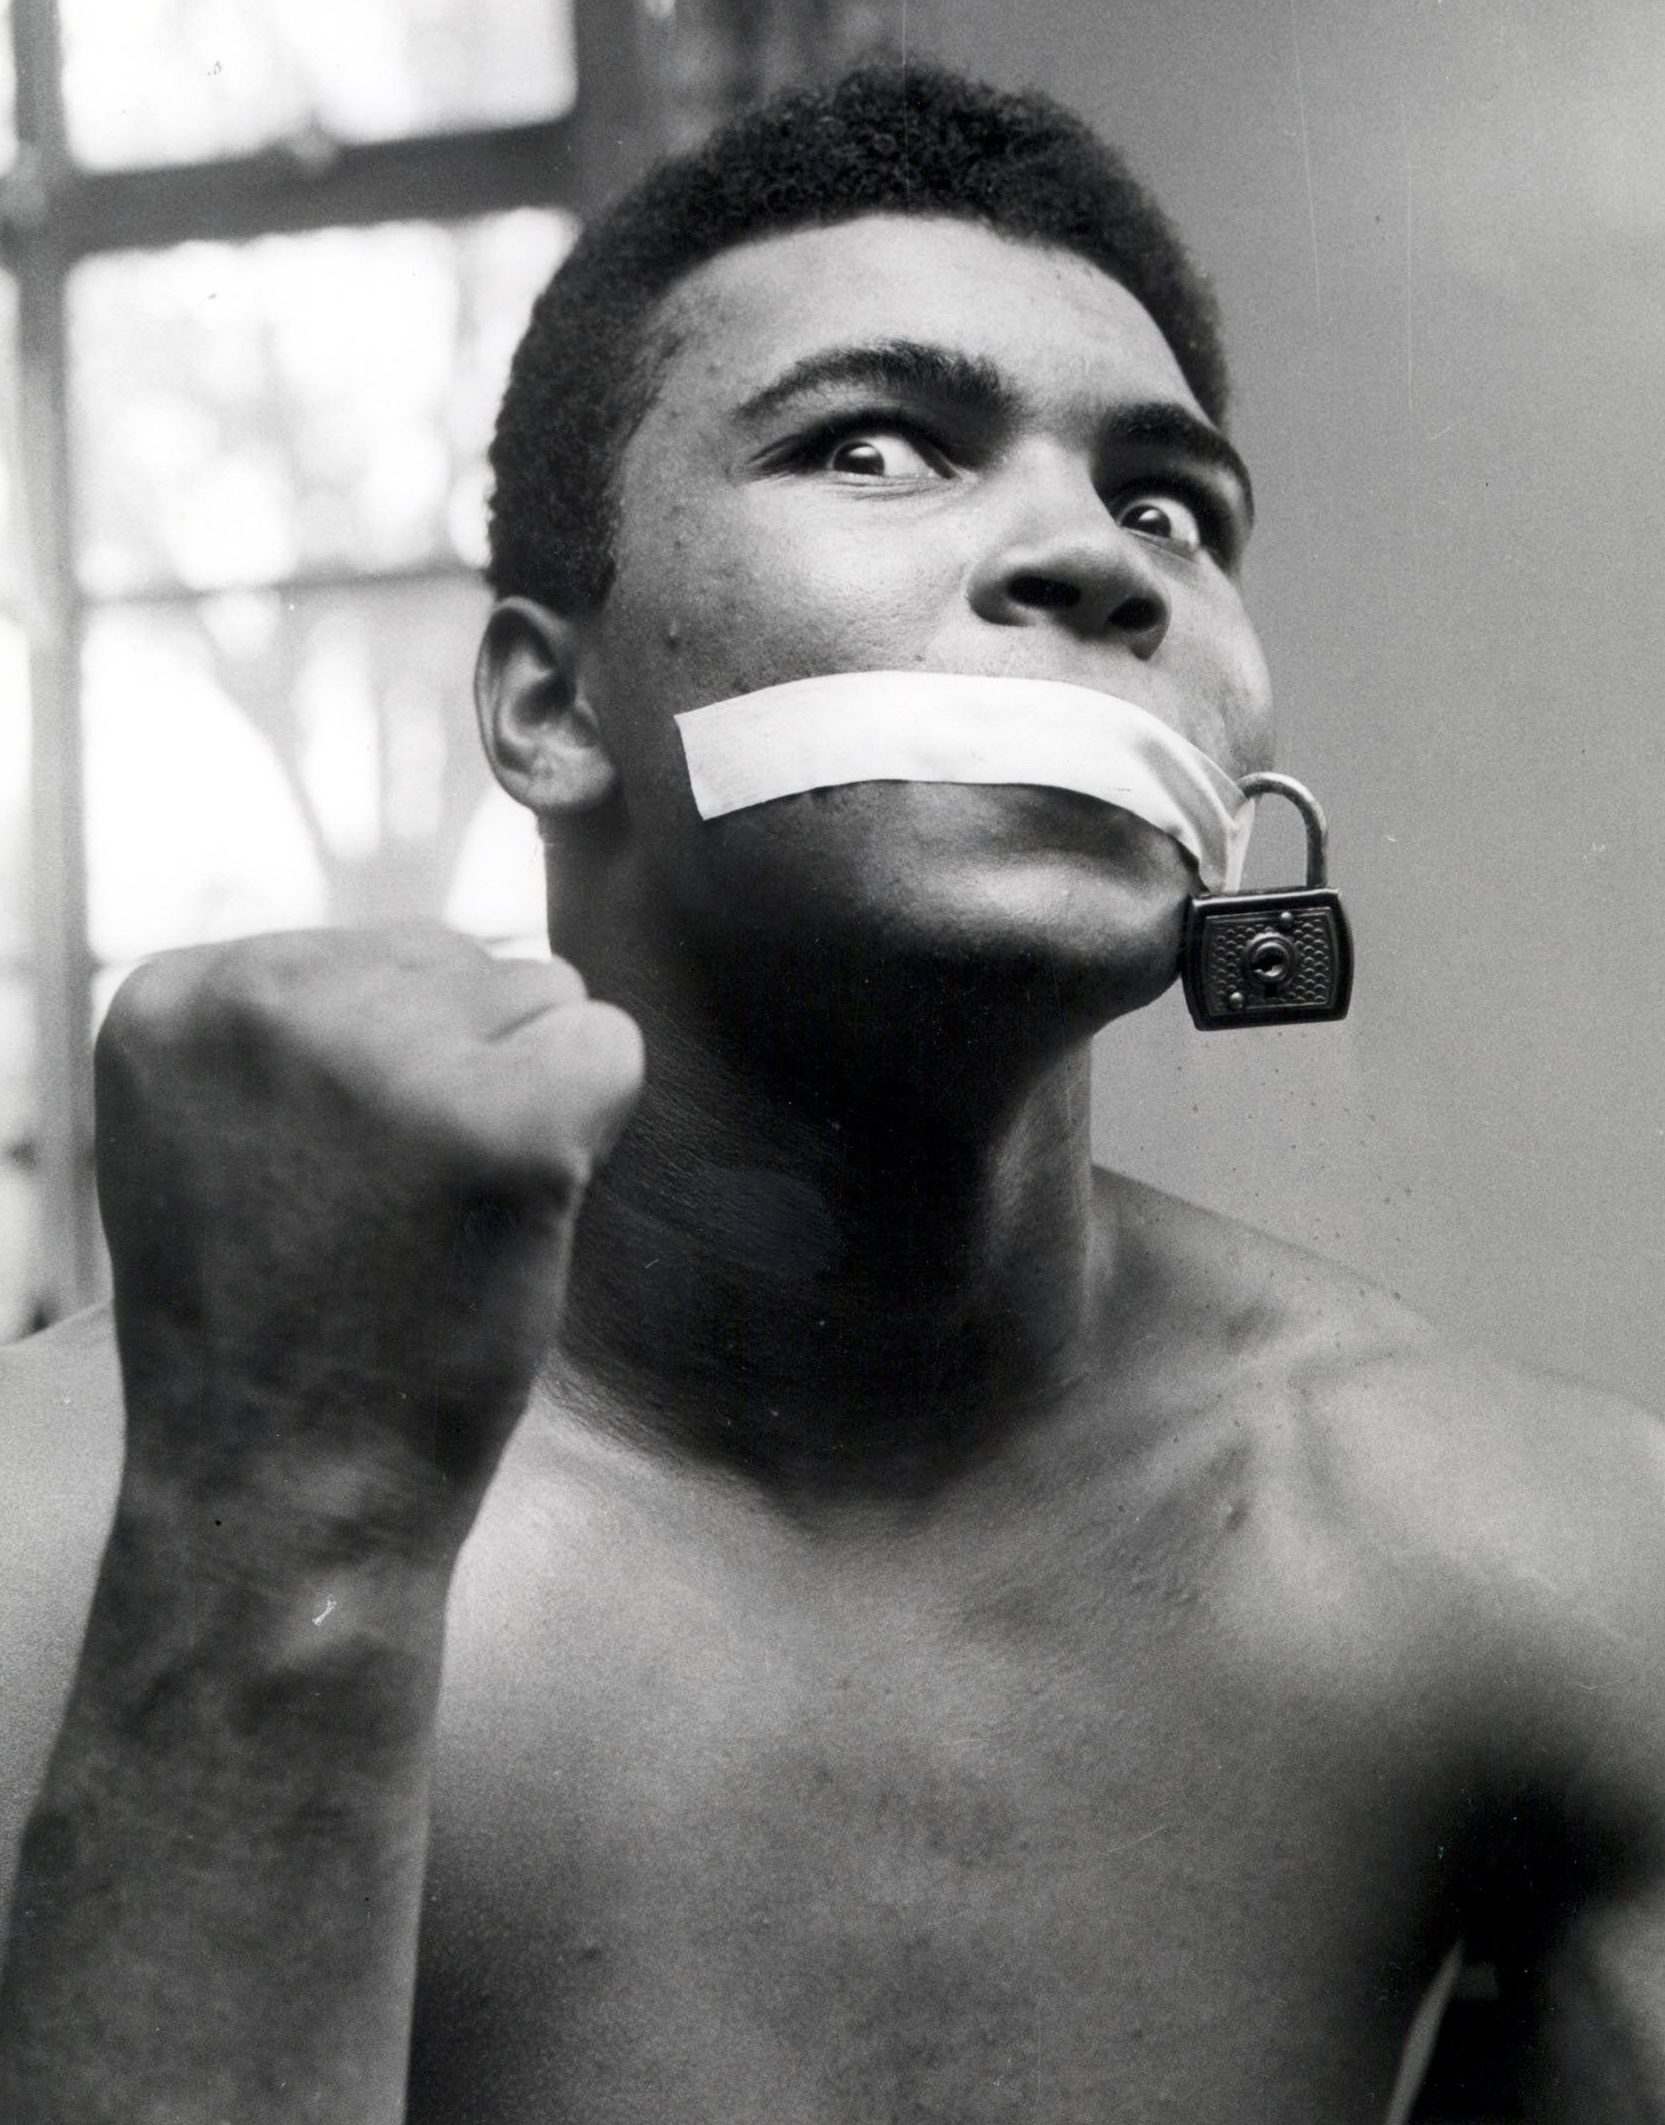  Ali was one of the giant figures of the 20th century whose name will forever be revered by future generations